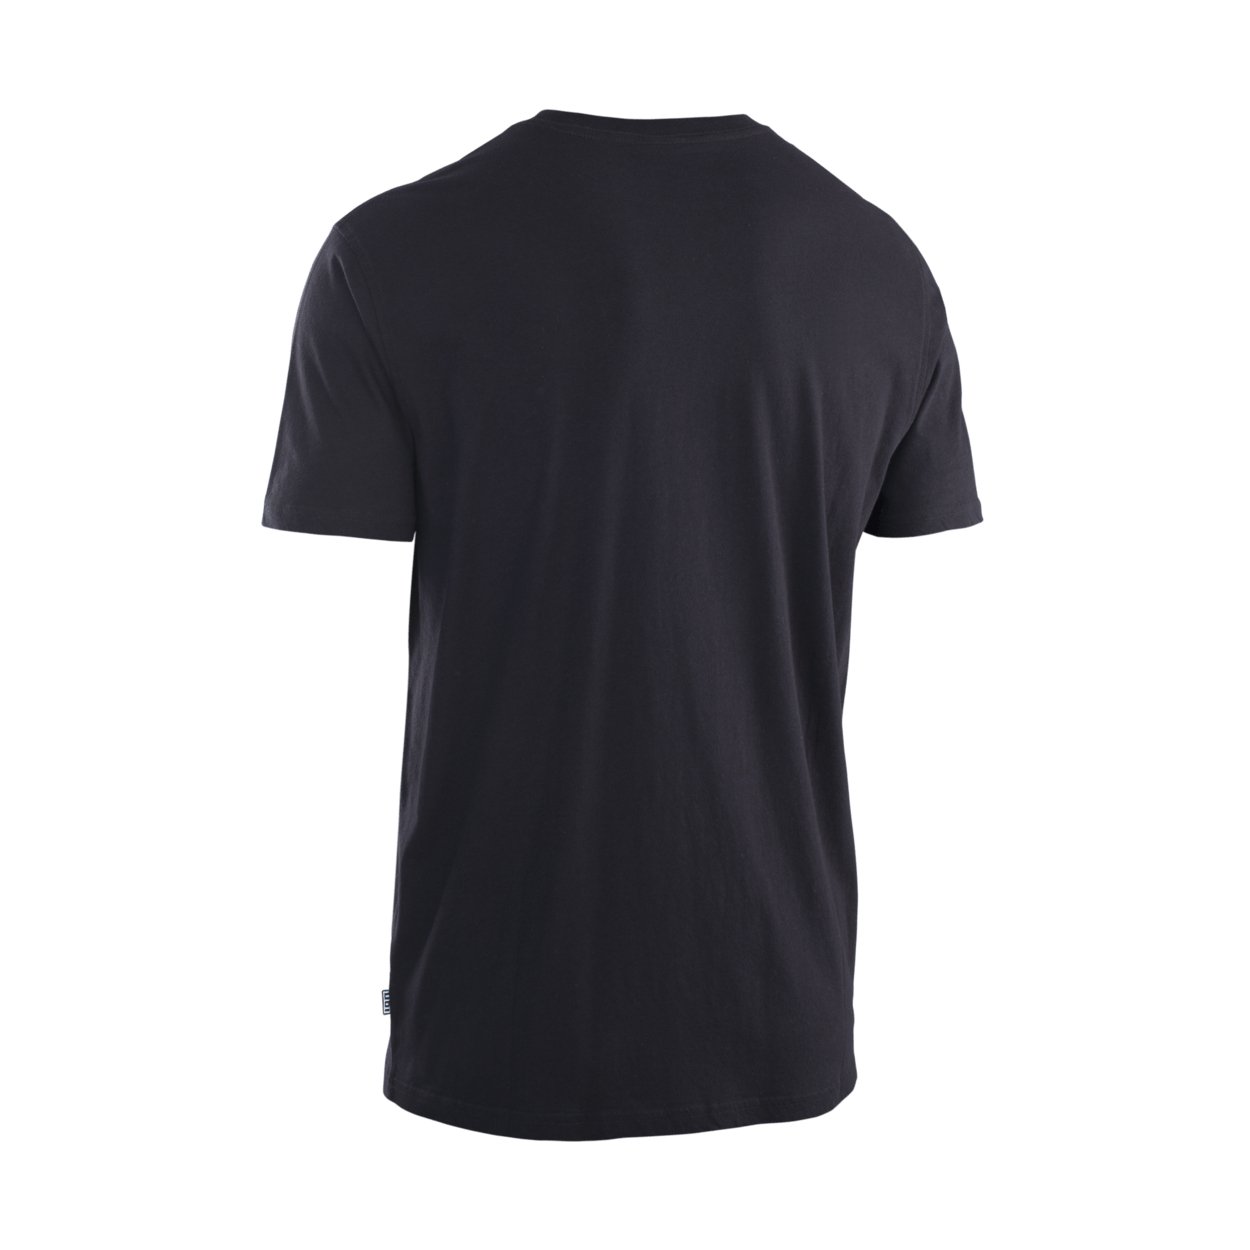 ION Tee Addicted SS men 2023 - Worthing Watersports - 9010583102351 - Apparel - ION Bike